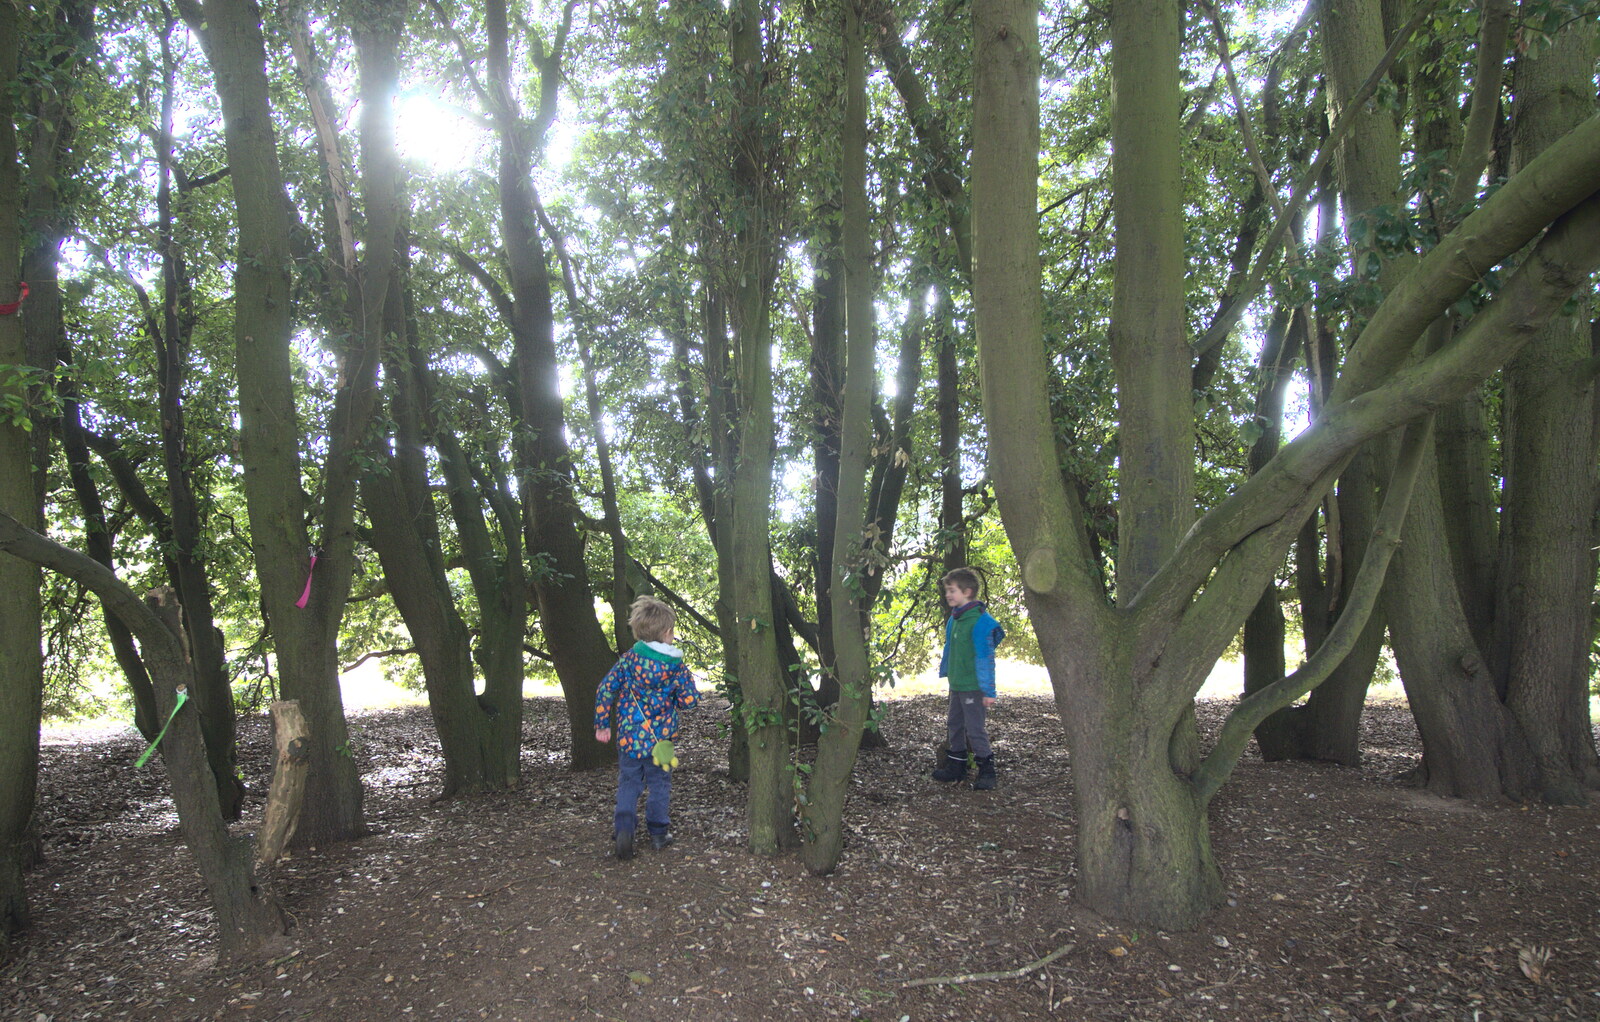 Harry and Fred find some trees to run around in from A Trip to Sutton Hoo, Woodbridge, Suffolk - 29th January 2017